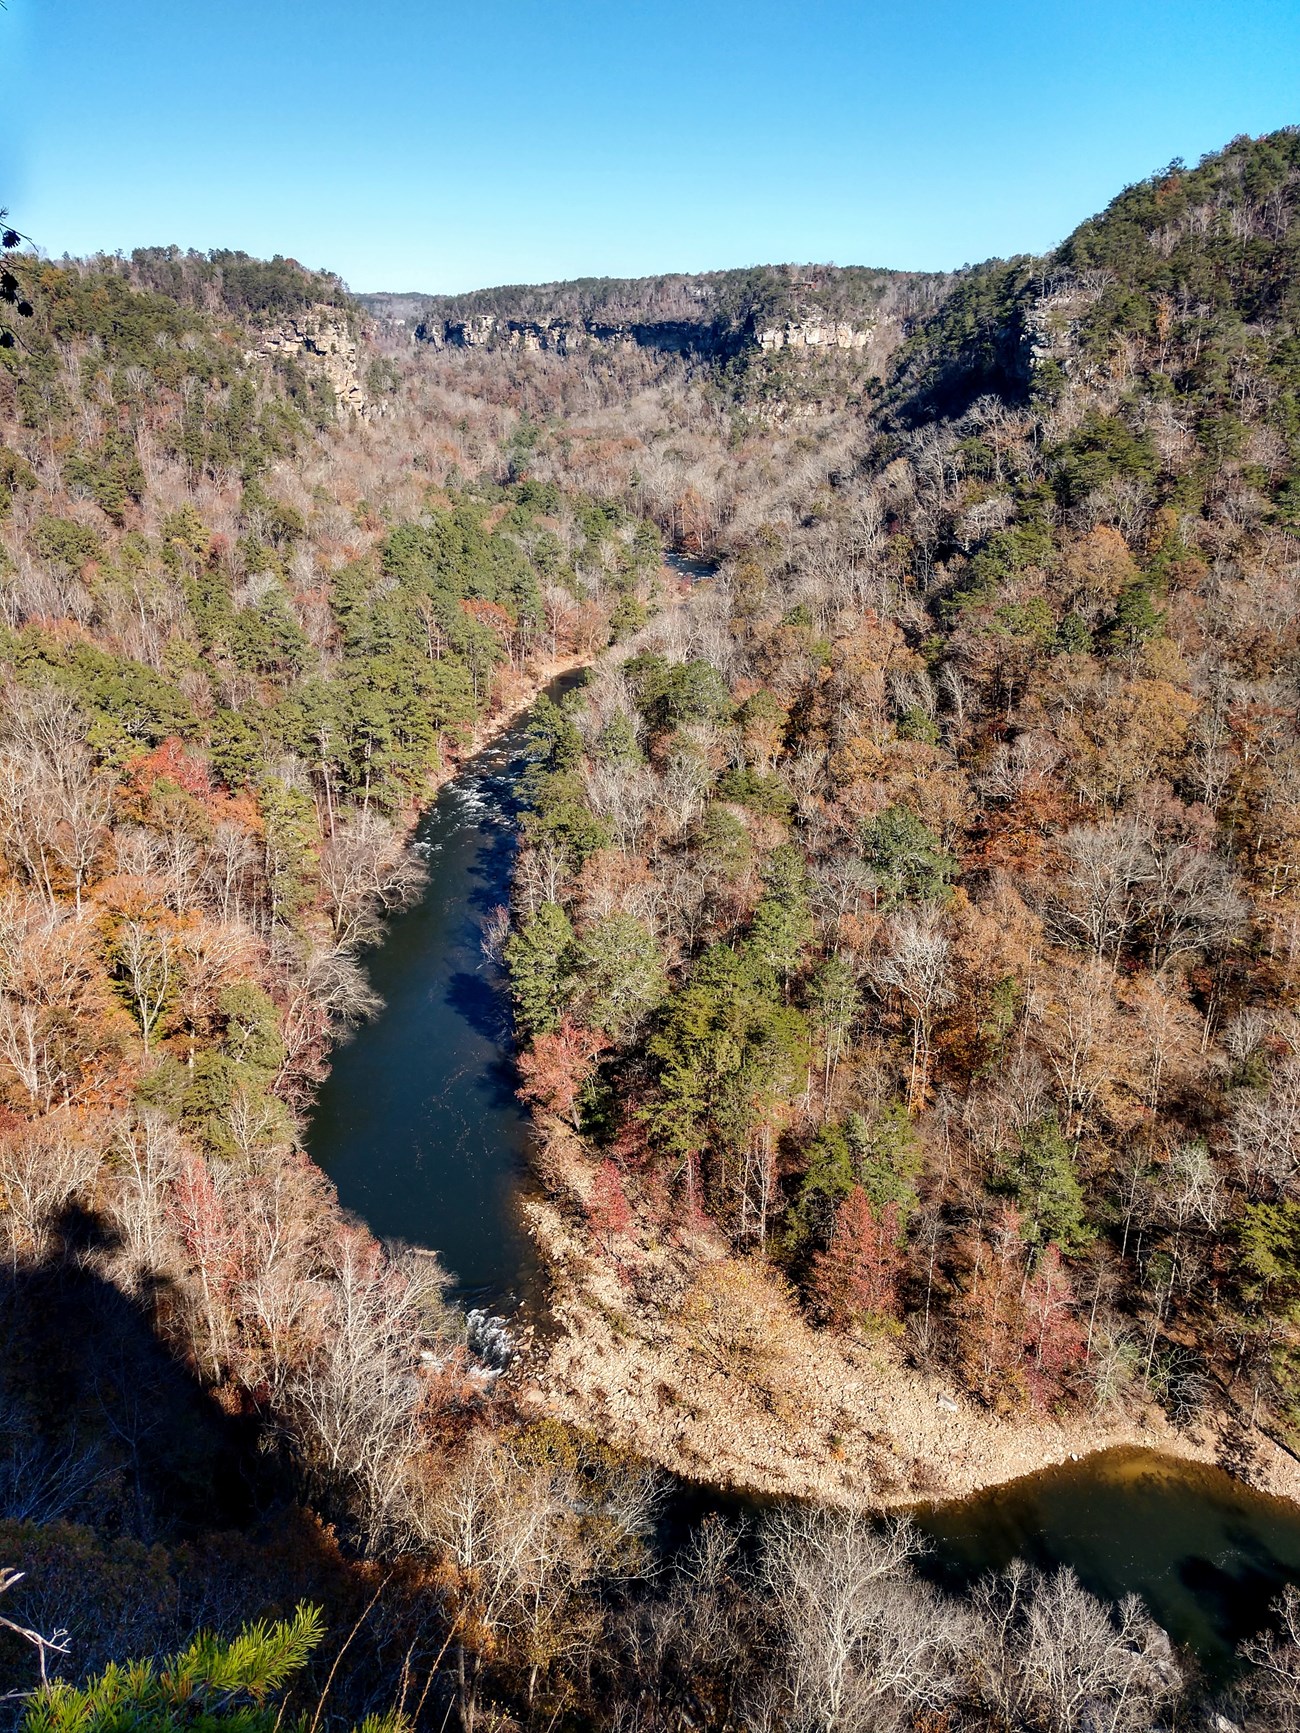 Little River Canyon with evergreens and the last oranges and browns of Fall color among mostly bare deciduous trees.